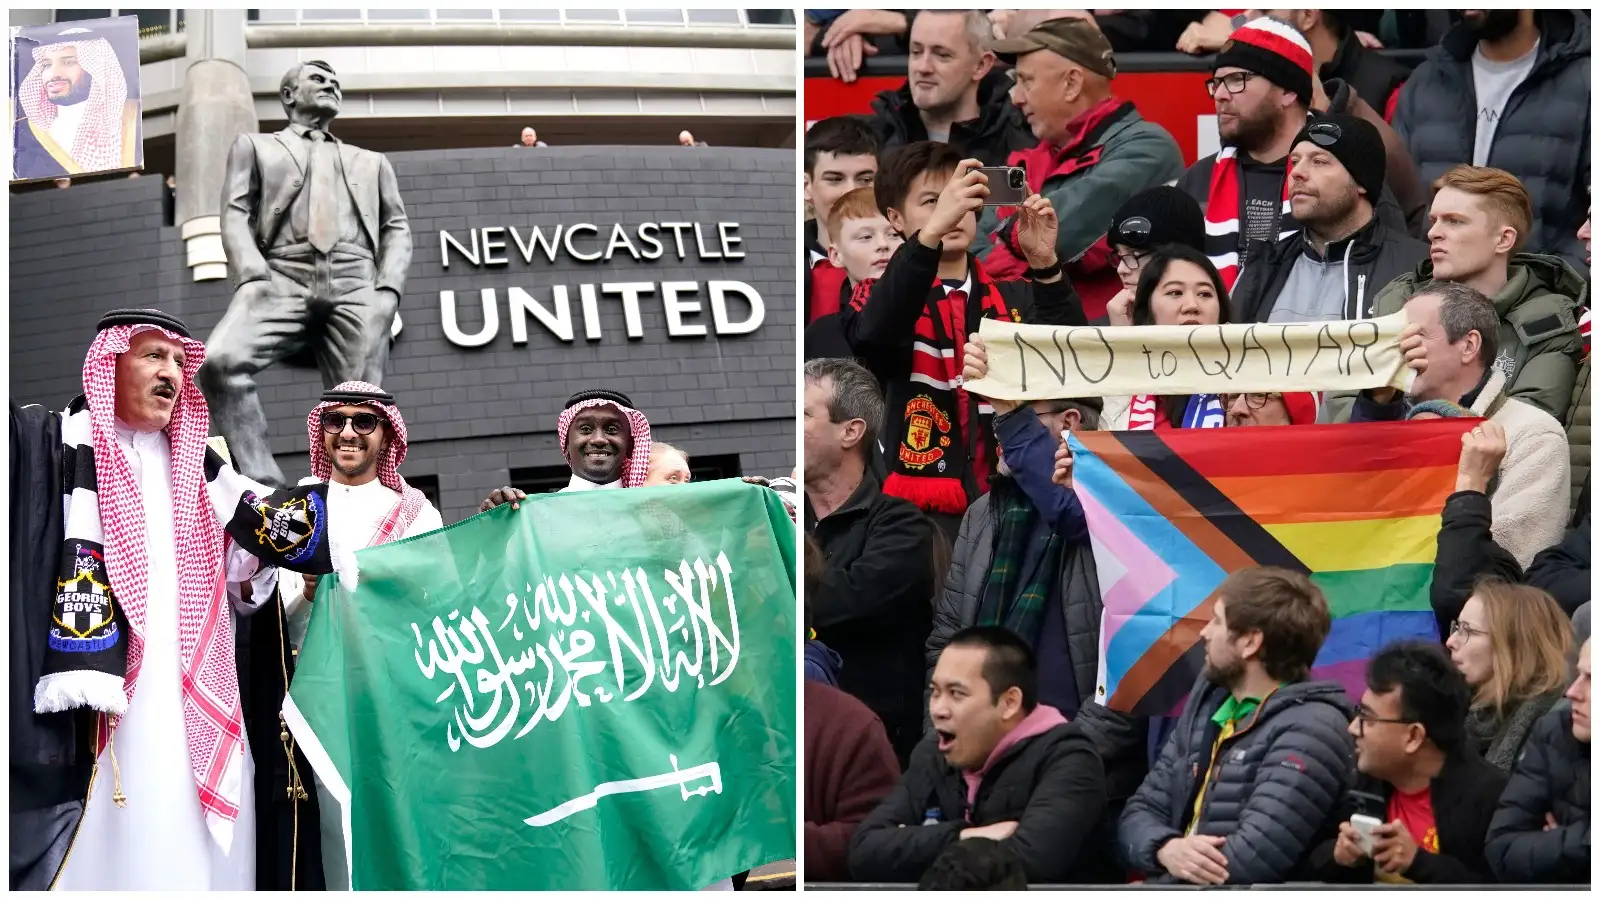 Manchester United fans display a 'no to Qatar' sign, next to an image of Newcastle fans in Saudi dress.